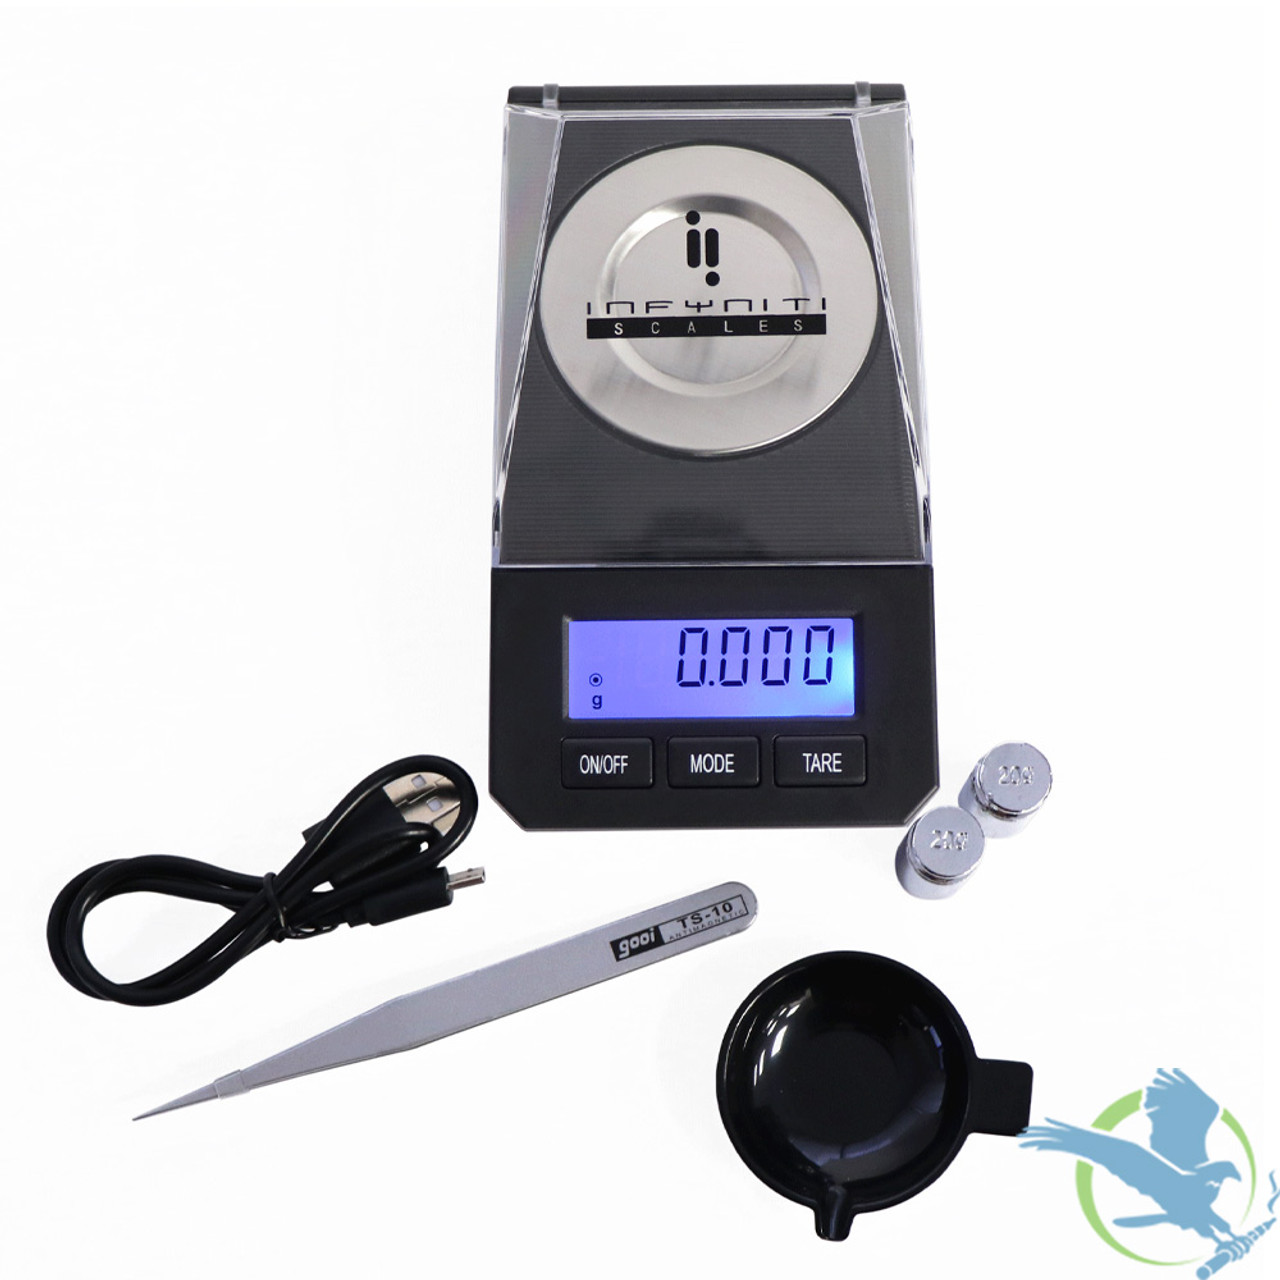 https://cdn11.bigcommerce.com/s-964anr/images/stencil/1280x1280/products/19584/96662/Infyniti-Scales-Infinite-Professional-Digital-Scale-50g-x-0.001g-SC-IN50__08674.1640902839.jpg?c=2